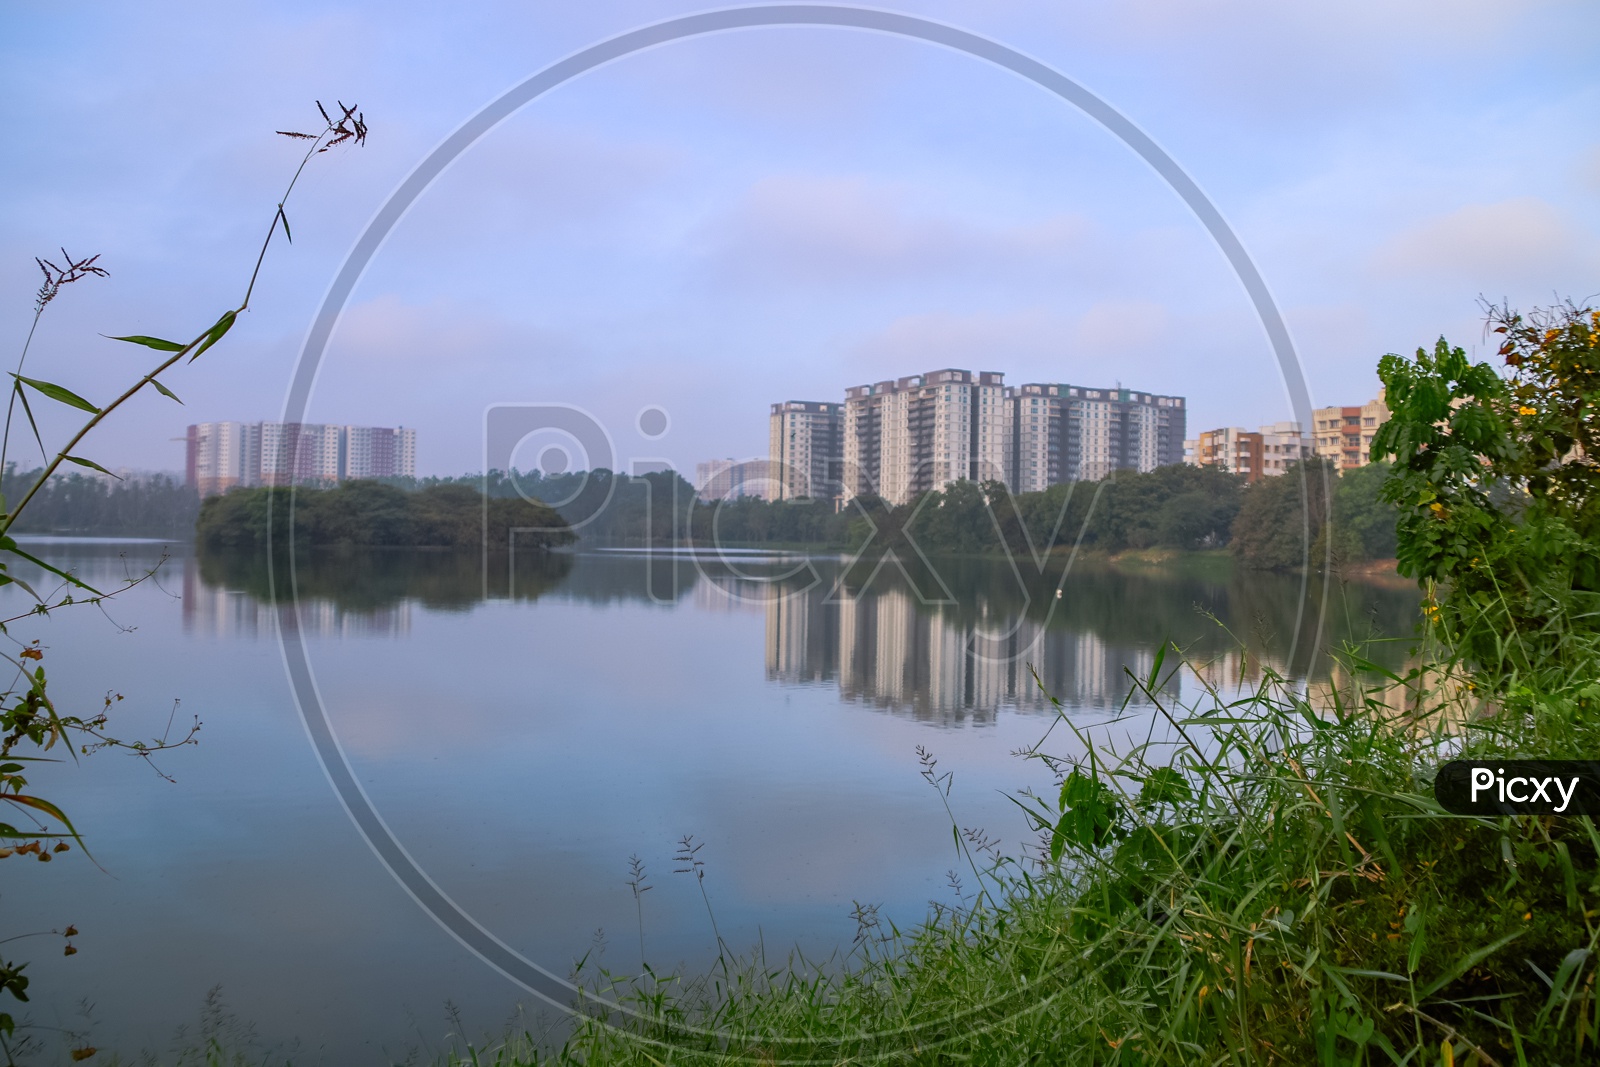 Landscape of buildings and lake